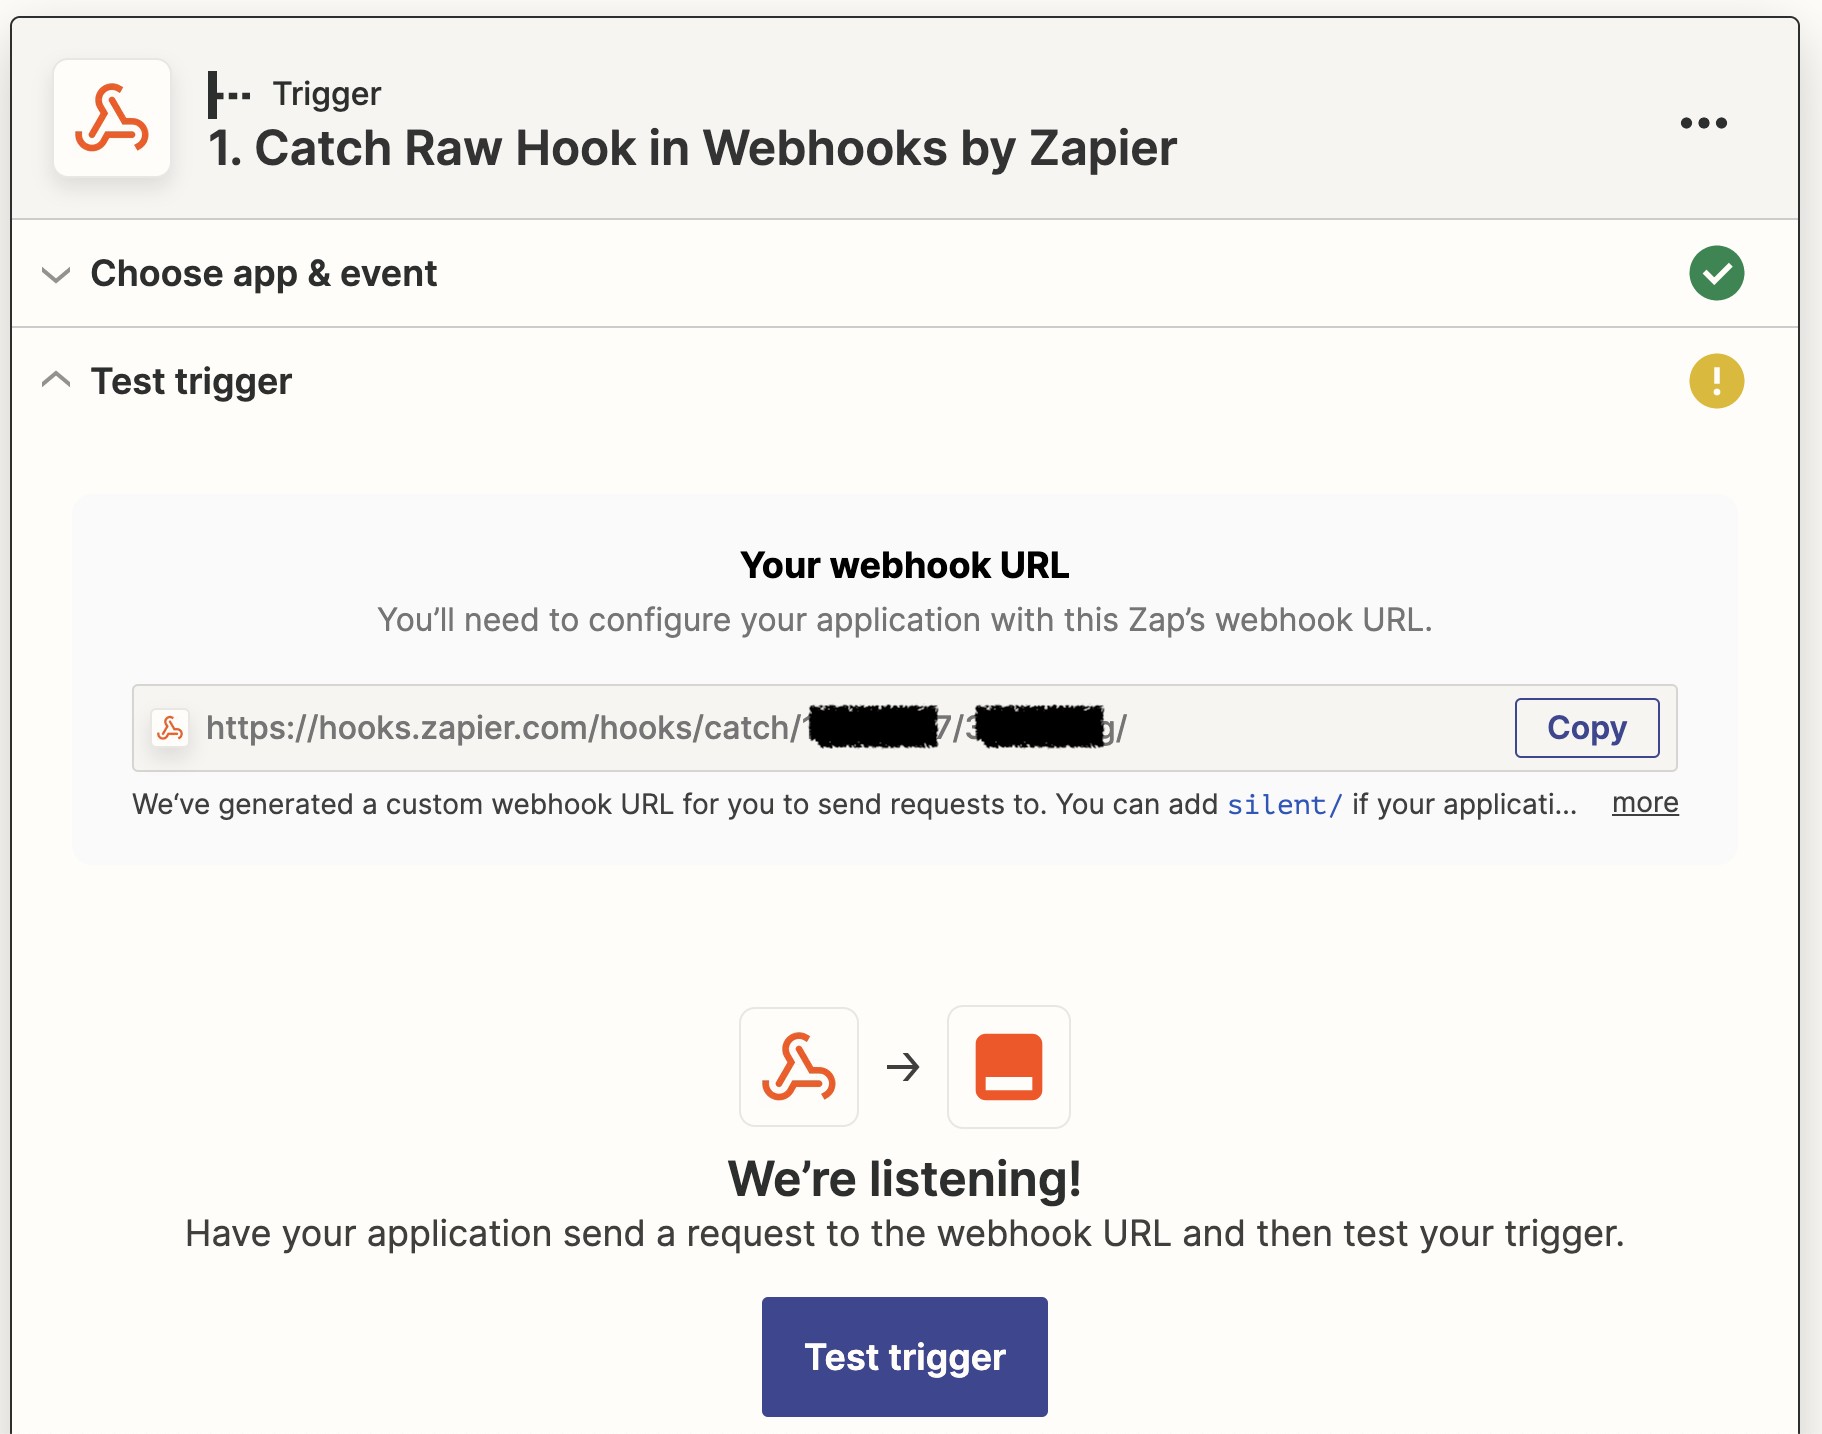 Screenshot of the Zapier UI, showing the webhook URL ready to be copied